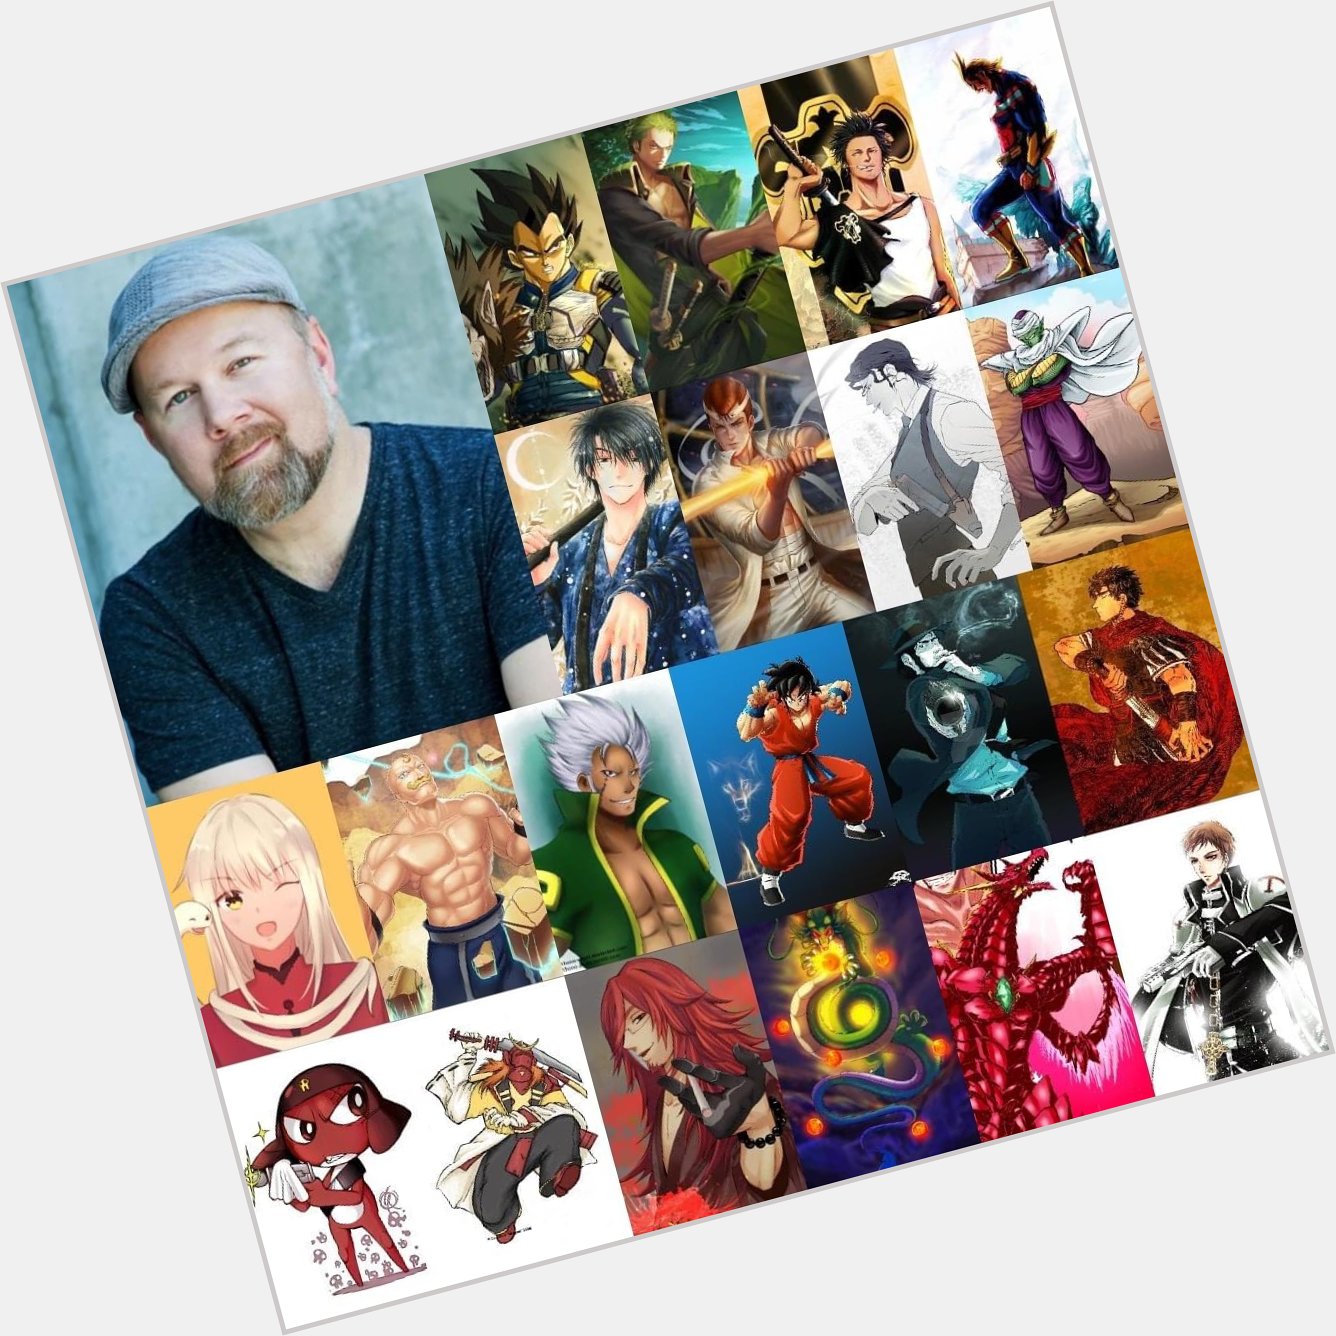 Christopher Sabat easily one of the greatest English VA s ever !! Happy birthday king 